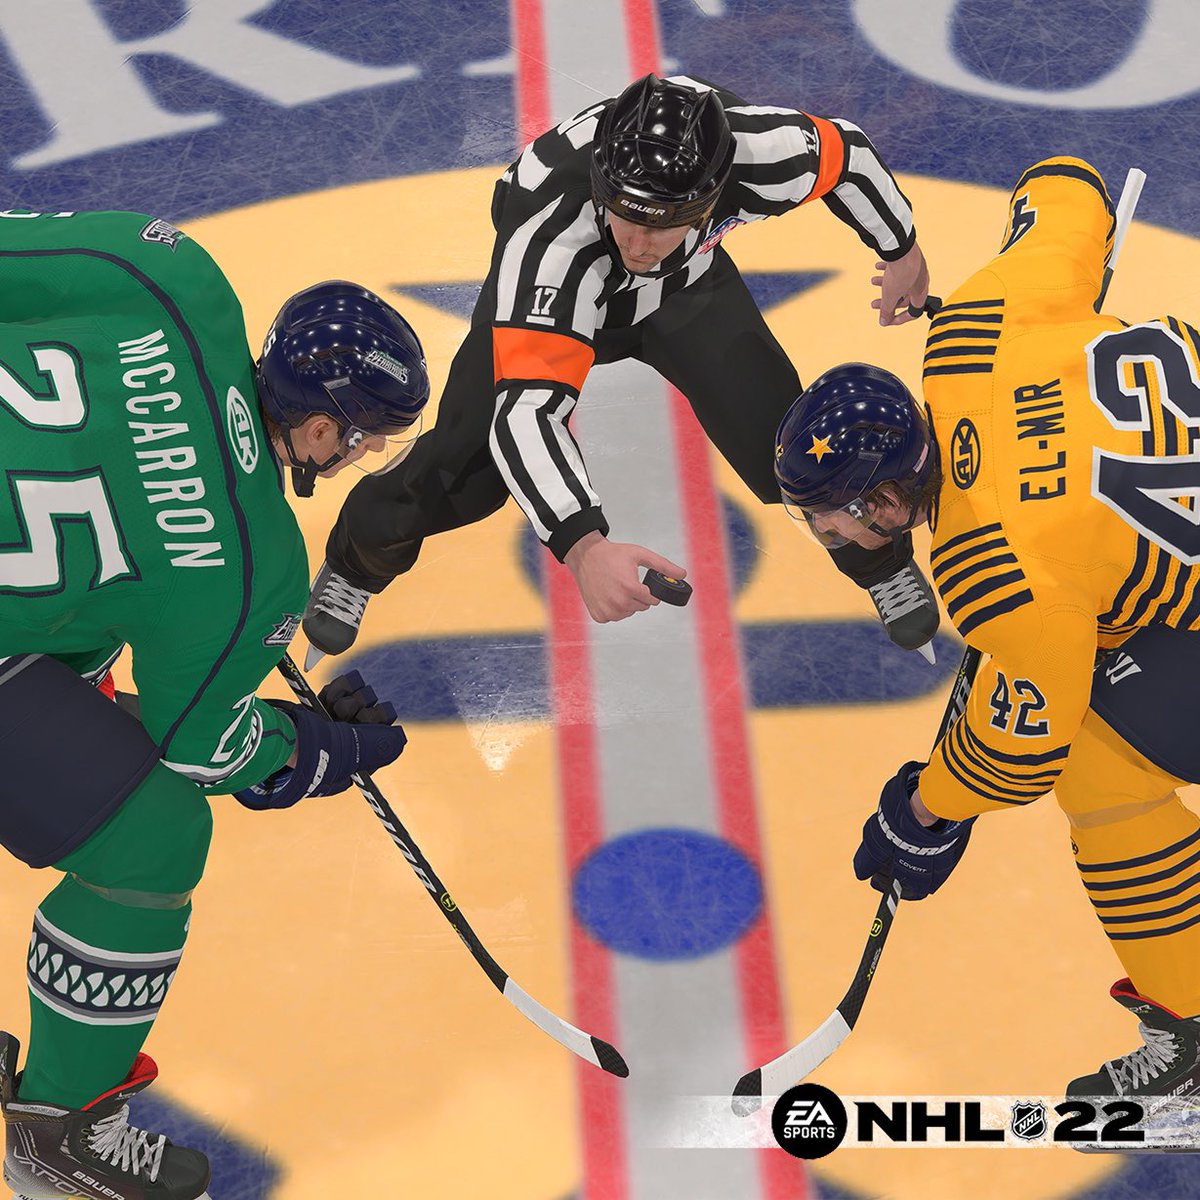 On the ice and on your gaming system, catch AK jerseys in action in NHL22! Have you played yet? 🎮
.
#NHL22 #EASports #TheNameInTheGame #AthleticKnit #CHEL #ECHL #InTheGame